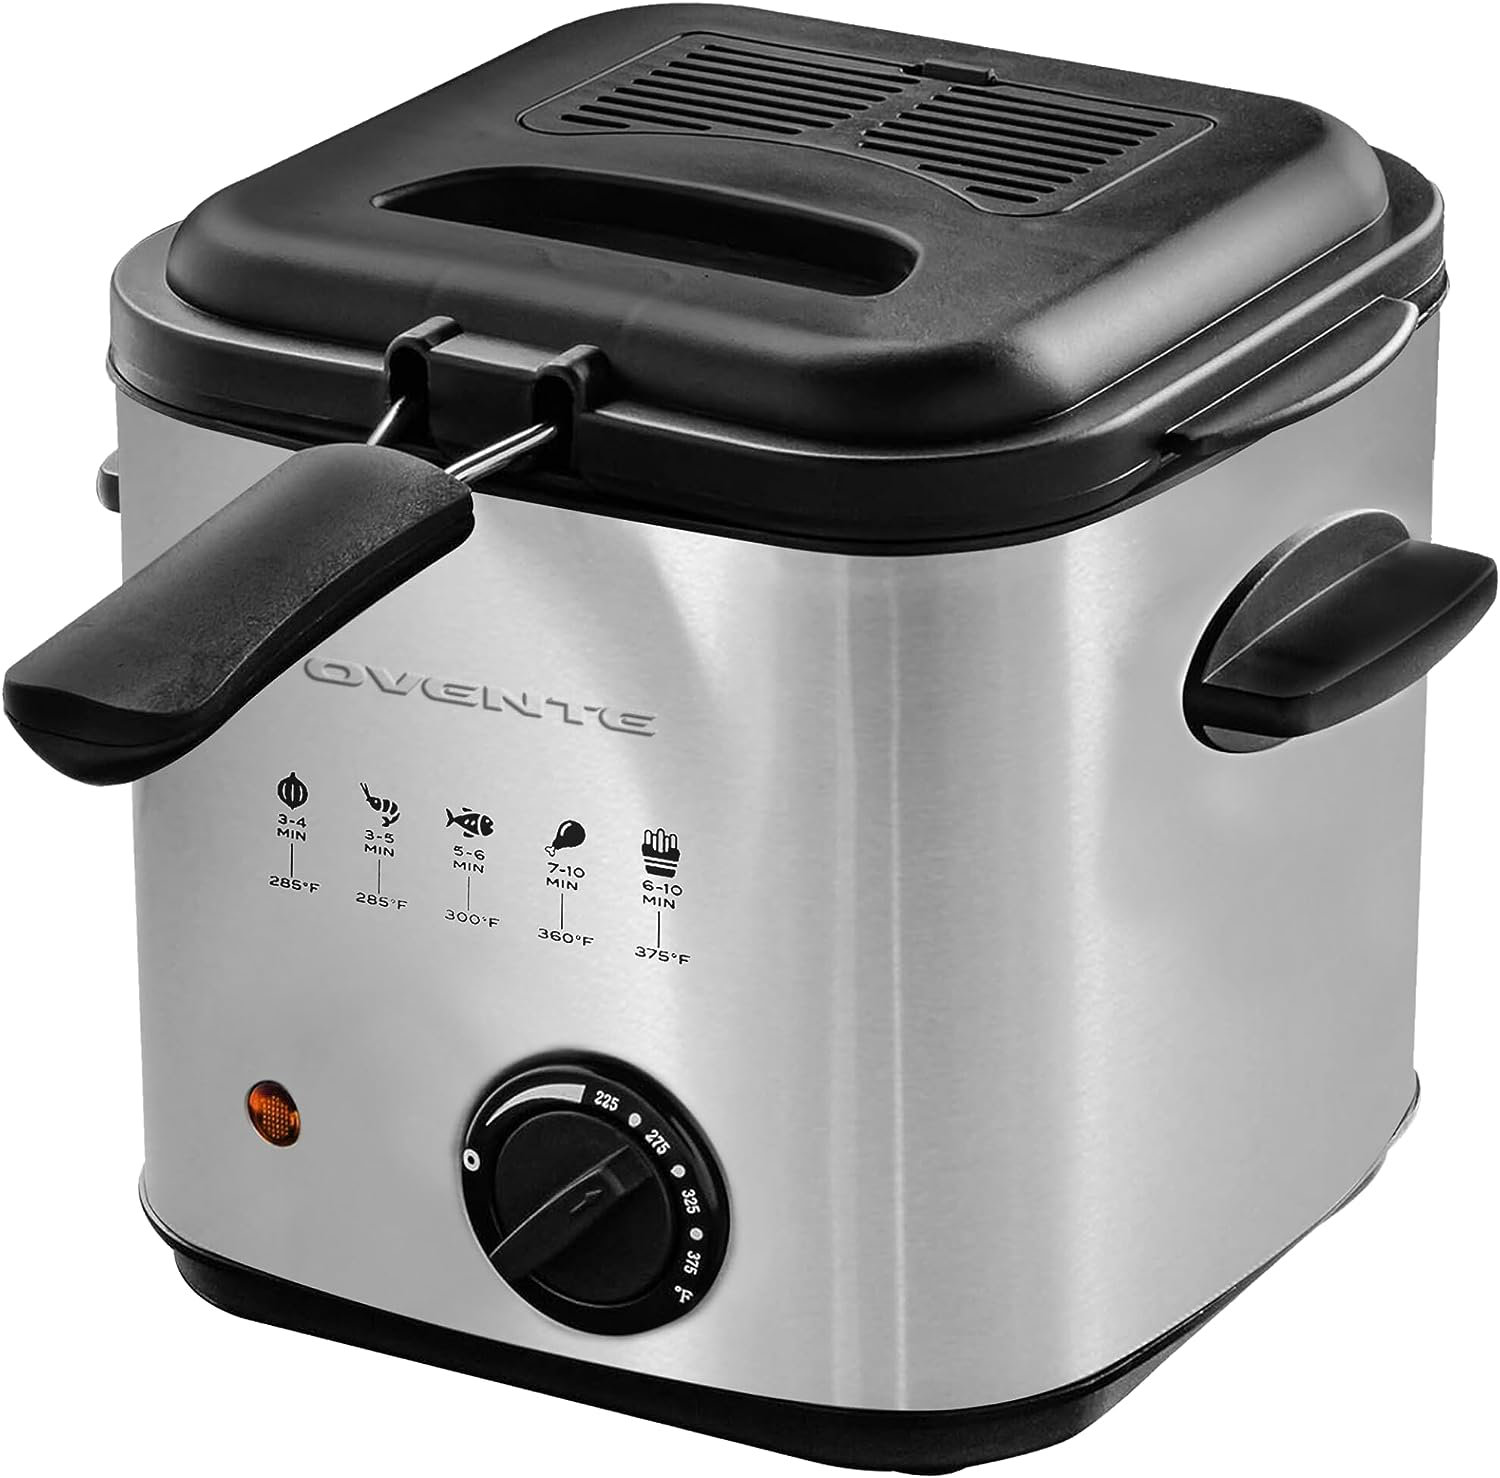 Household/Commercial Electric Fryer 2.5L Frying Machine French